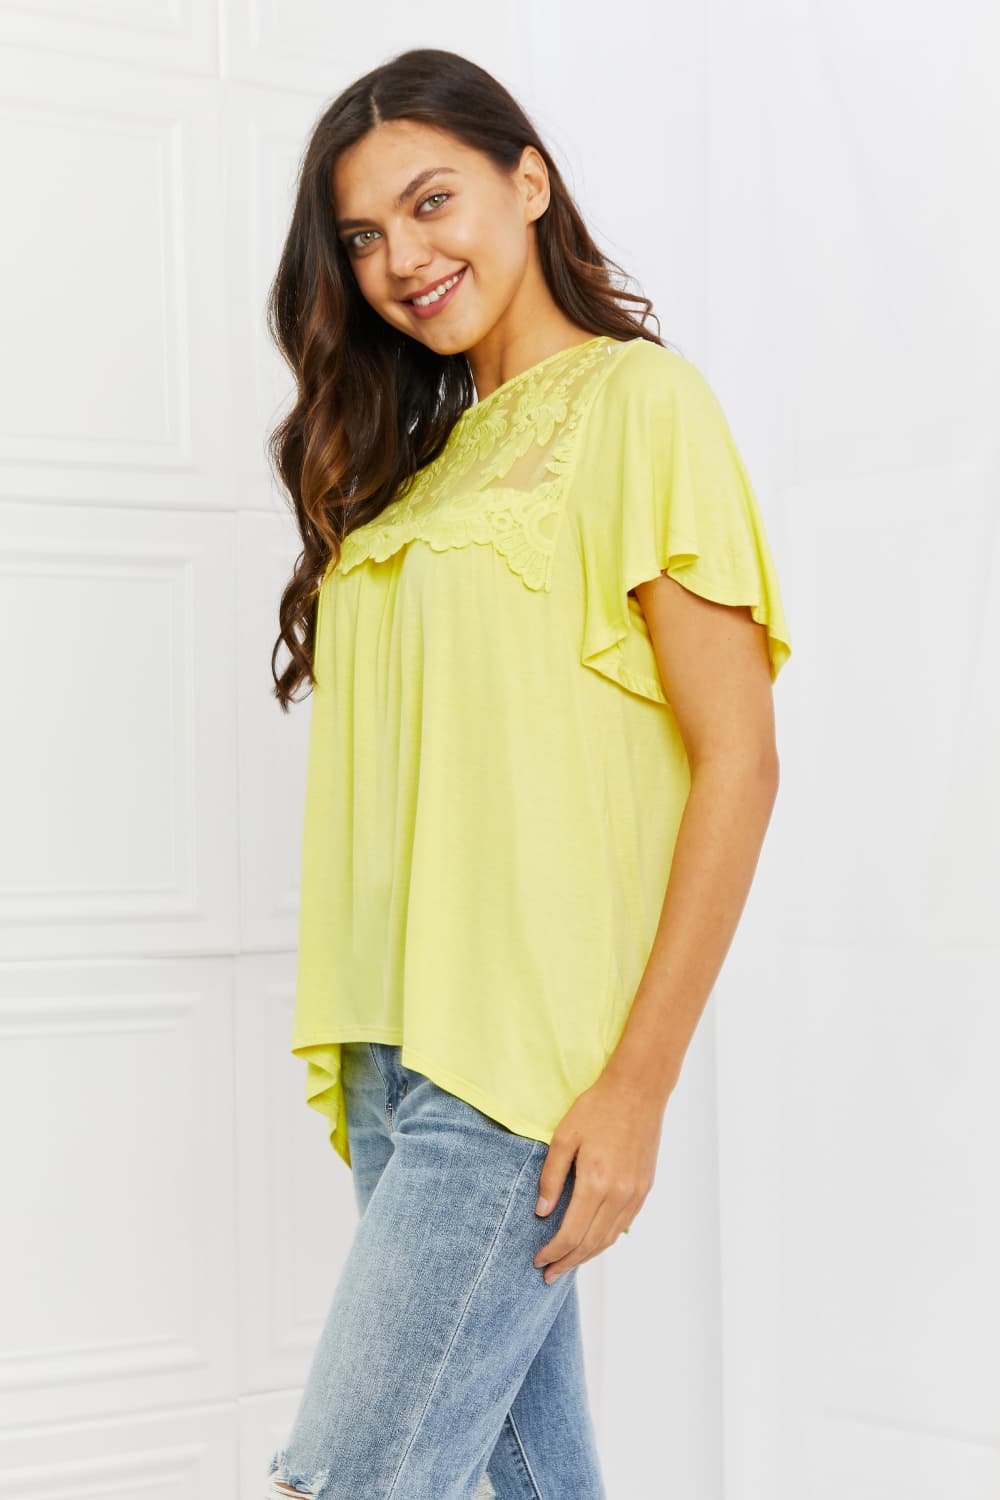 Culture Code Ready To Go Full Size Lace Embroidered Top in Yellow Mousse - The Fashion Unicorn